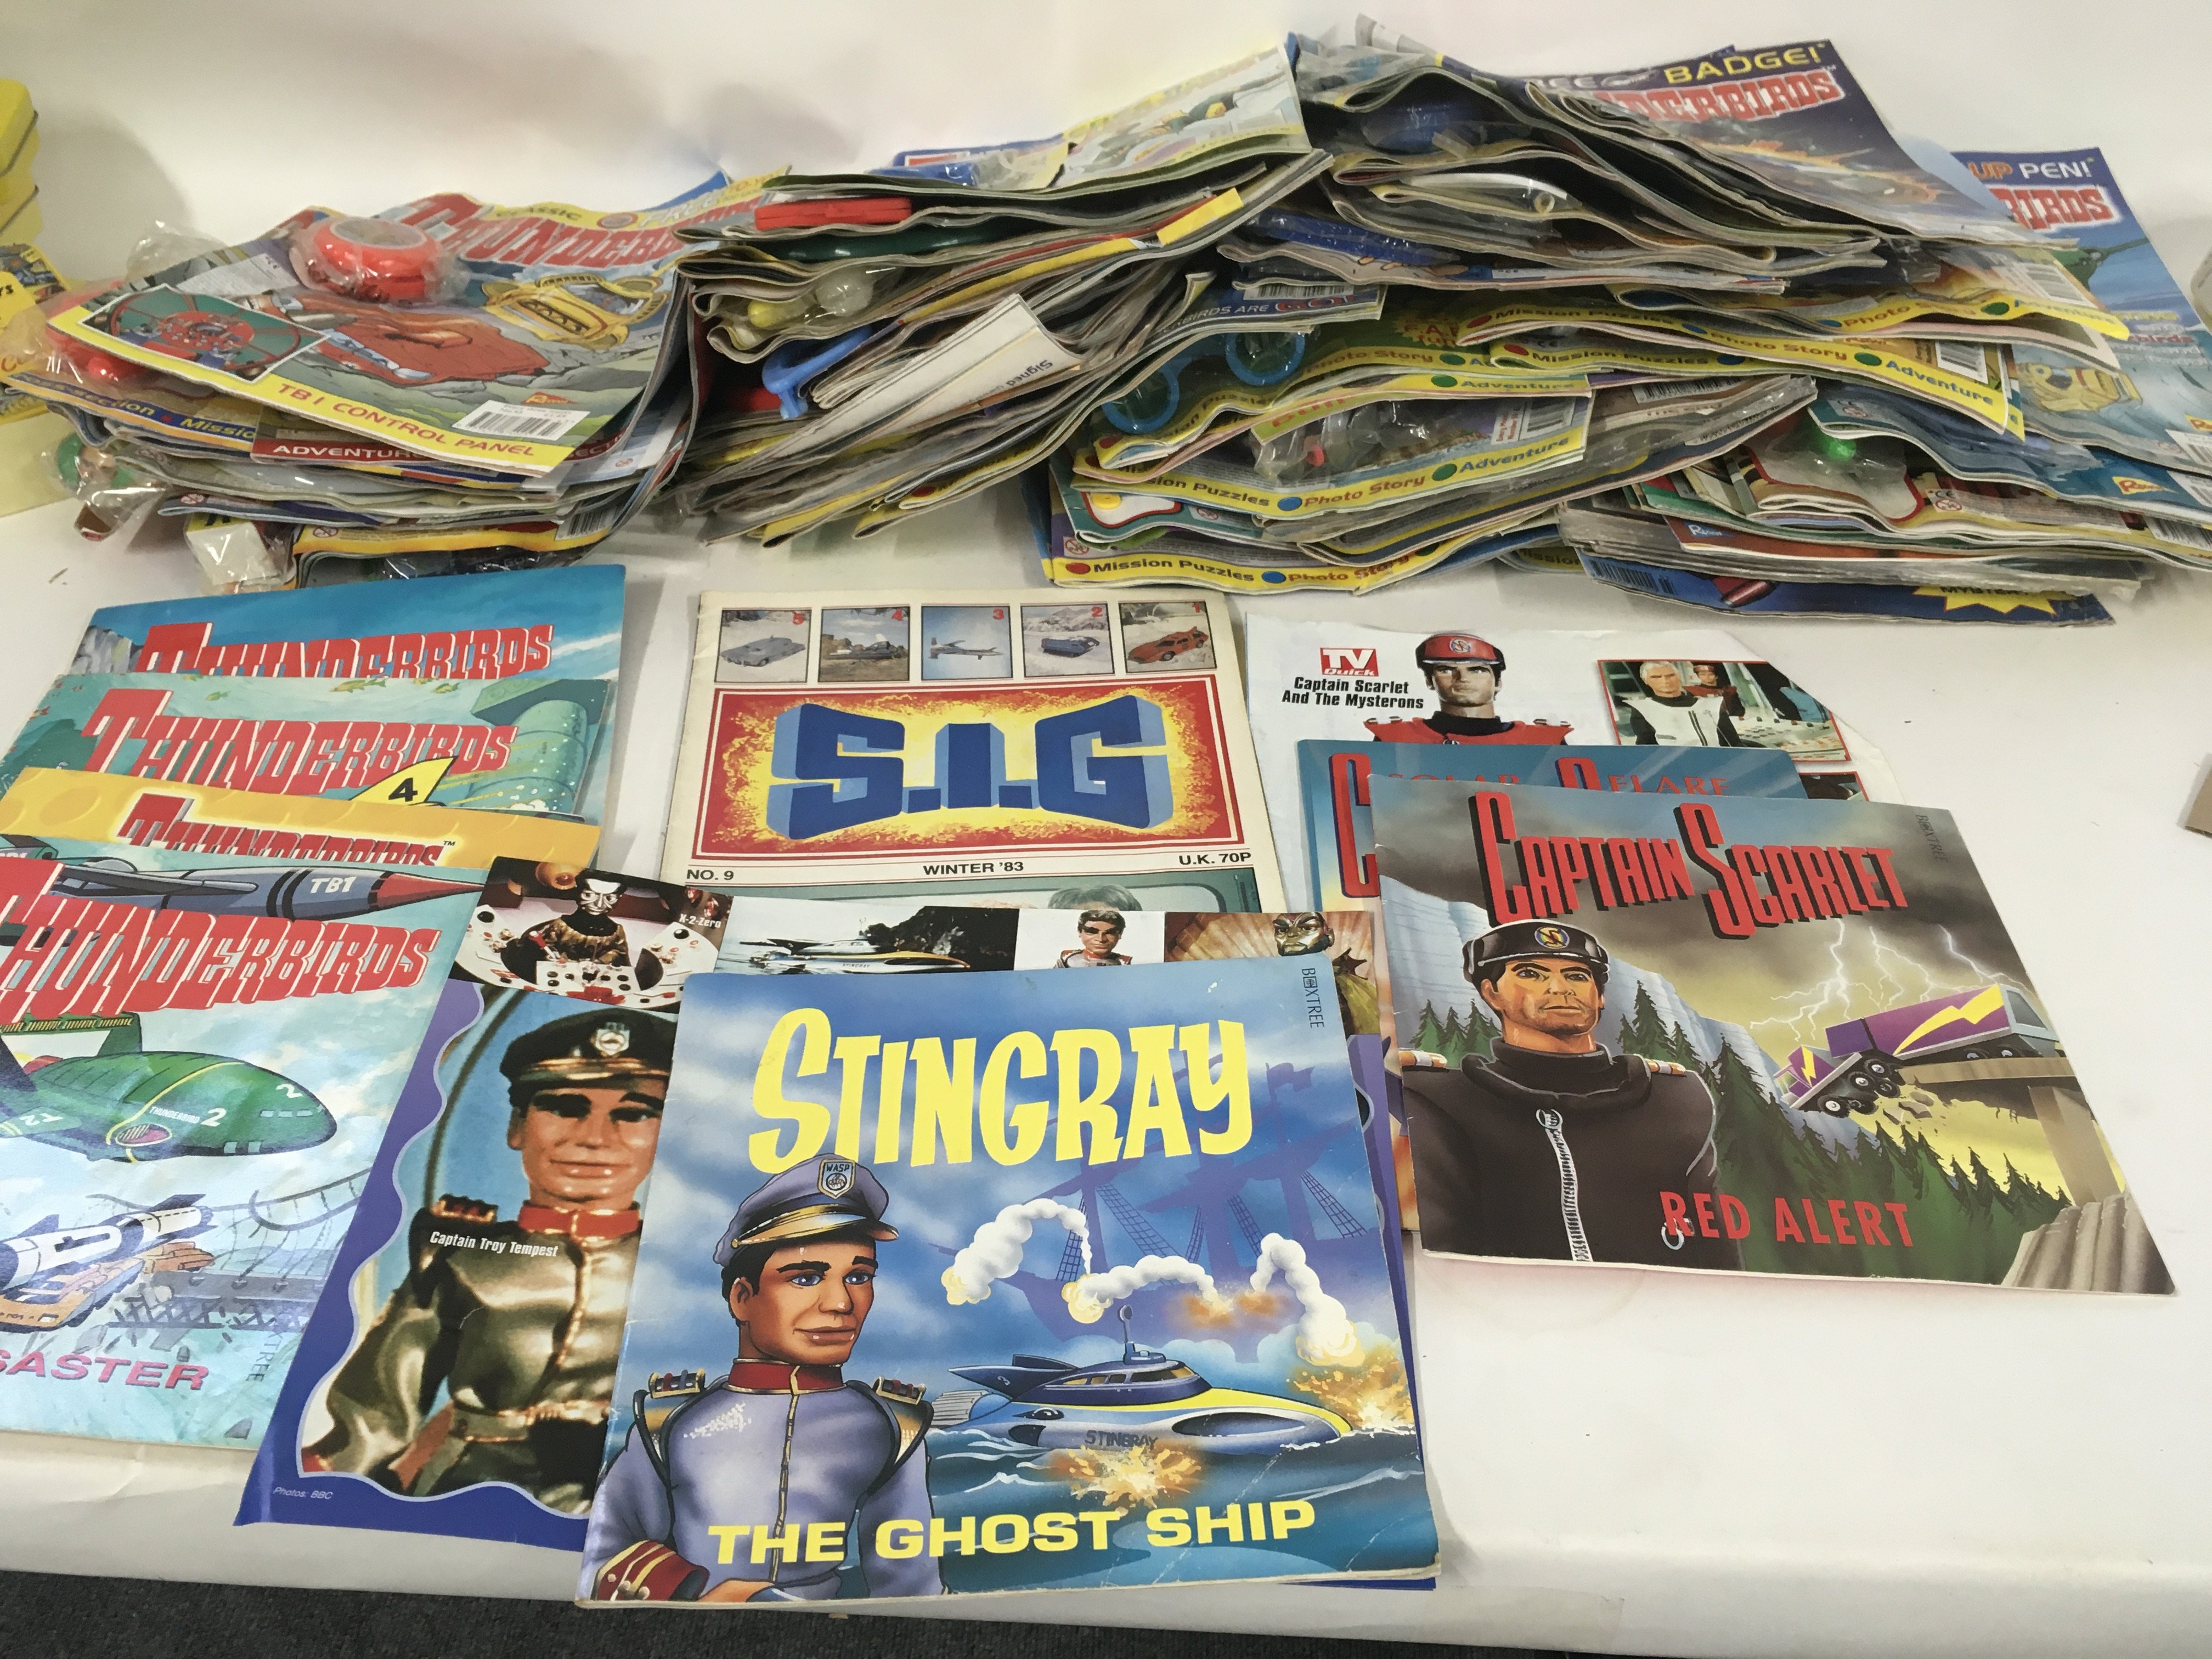 A collection of thunderbirds and Captain scarlet t